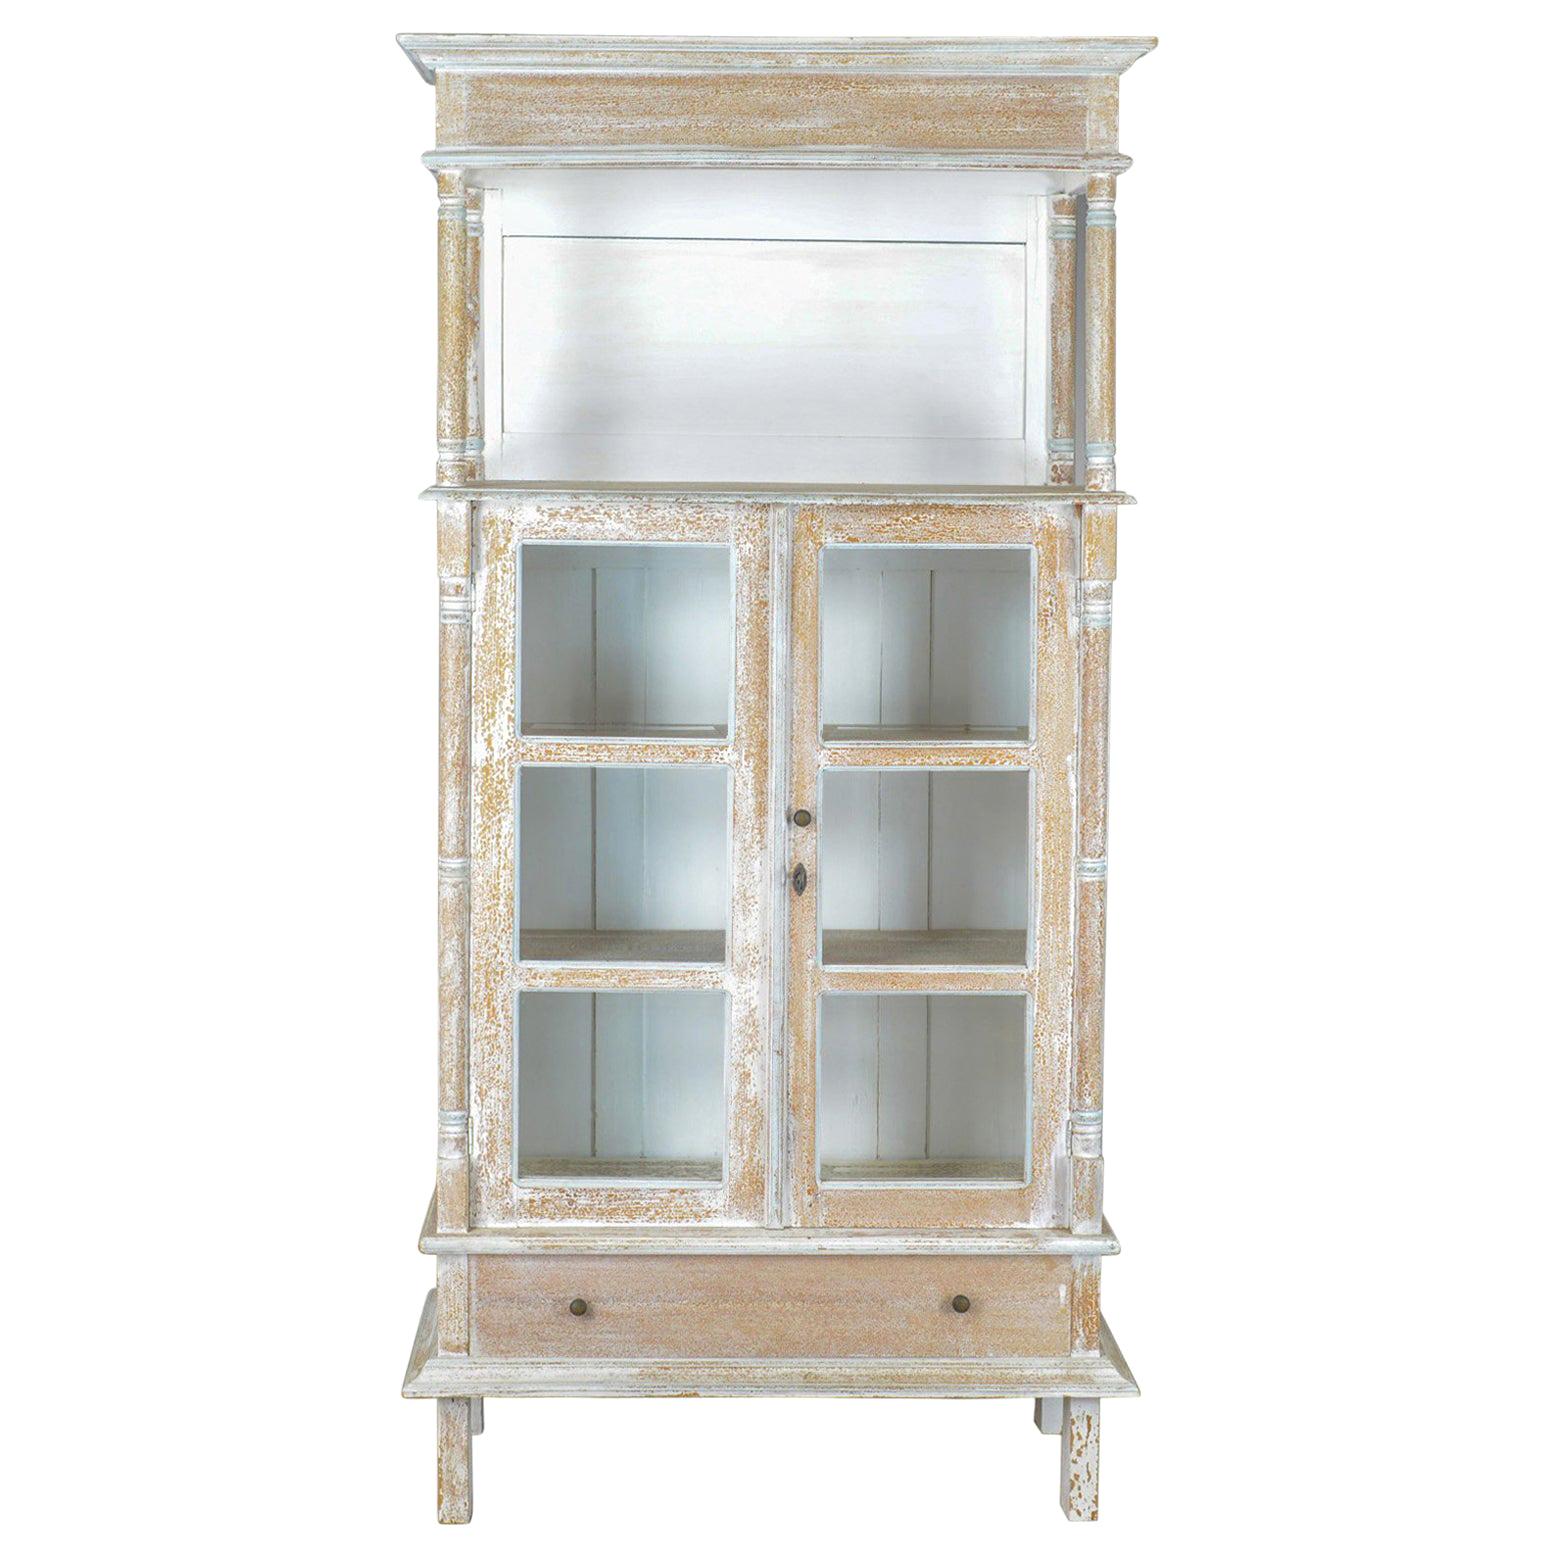 Antique Display Cabinet, Tall, French, Limed Oak Cupboard, Early 20th Century